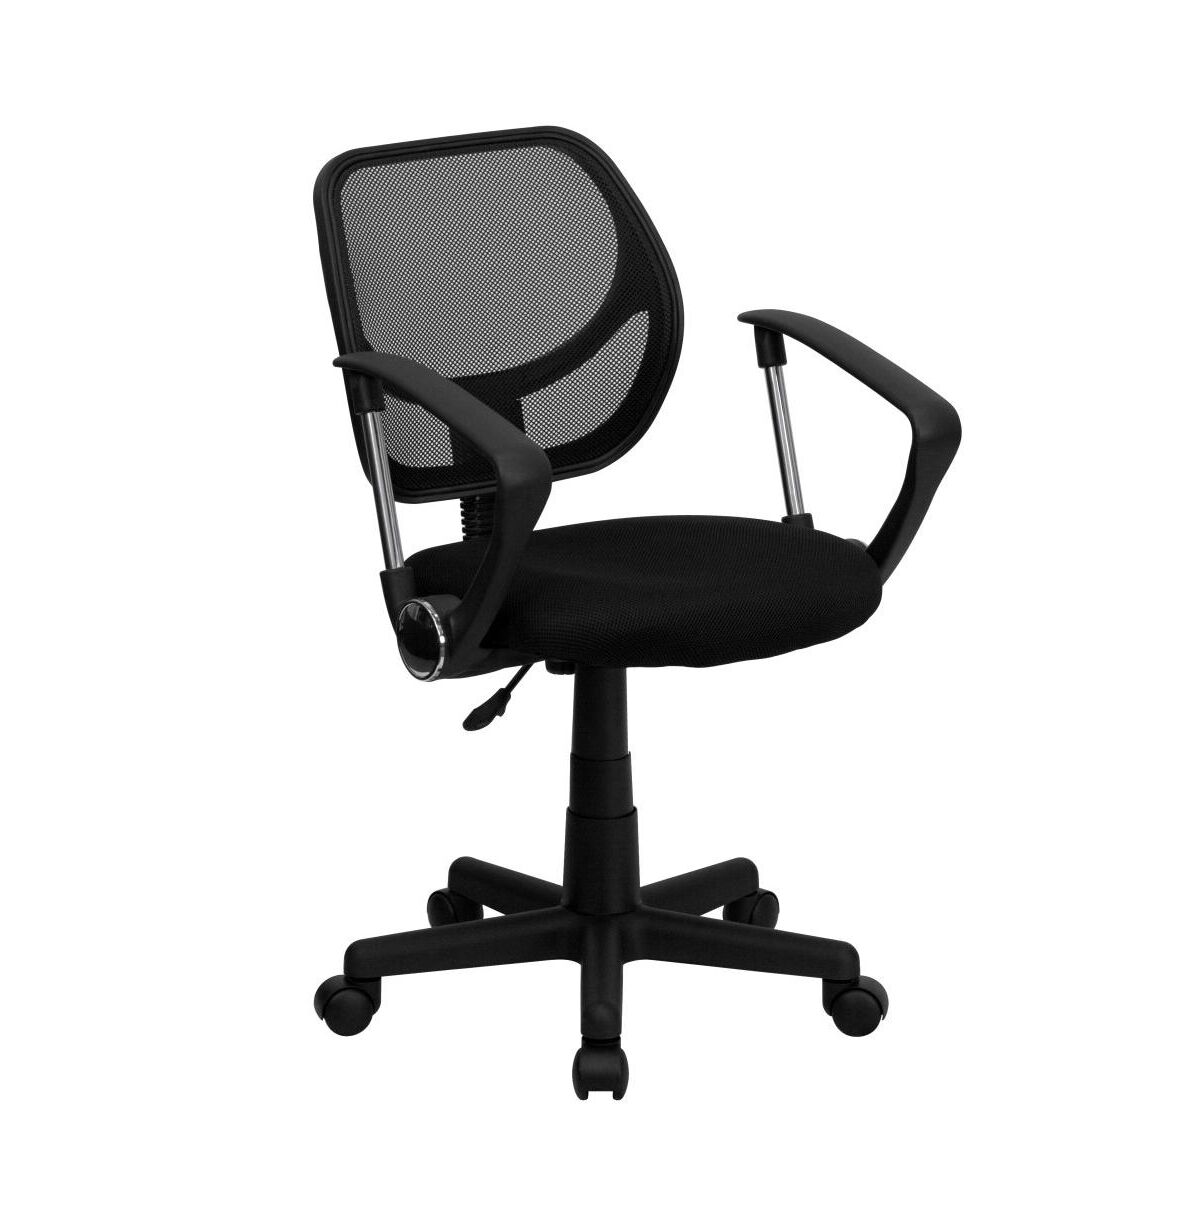 Emma+oliver Mid-Back Mesh Swivel Task Office Chair With Curved Square Back And Arms - Black